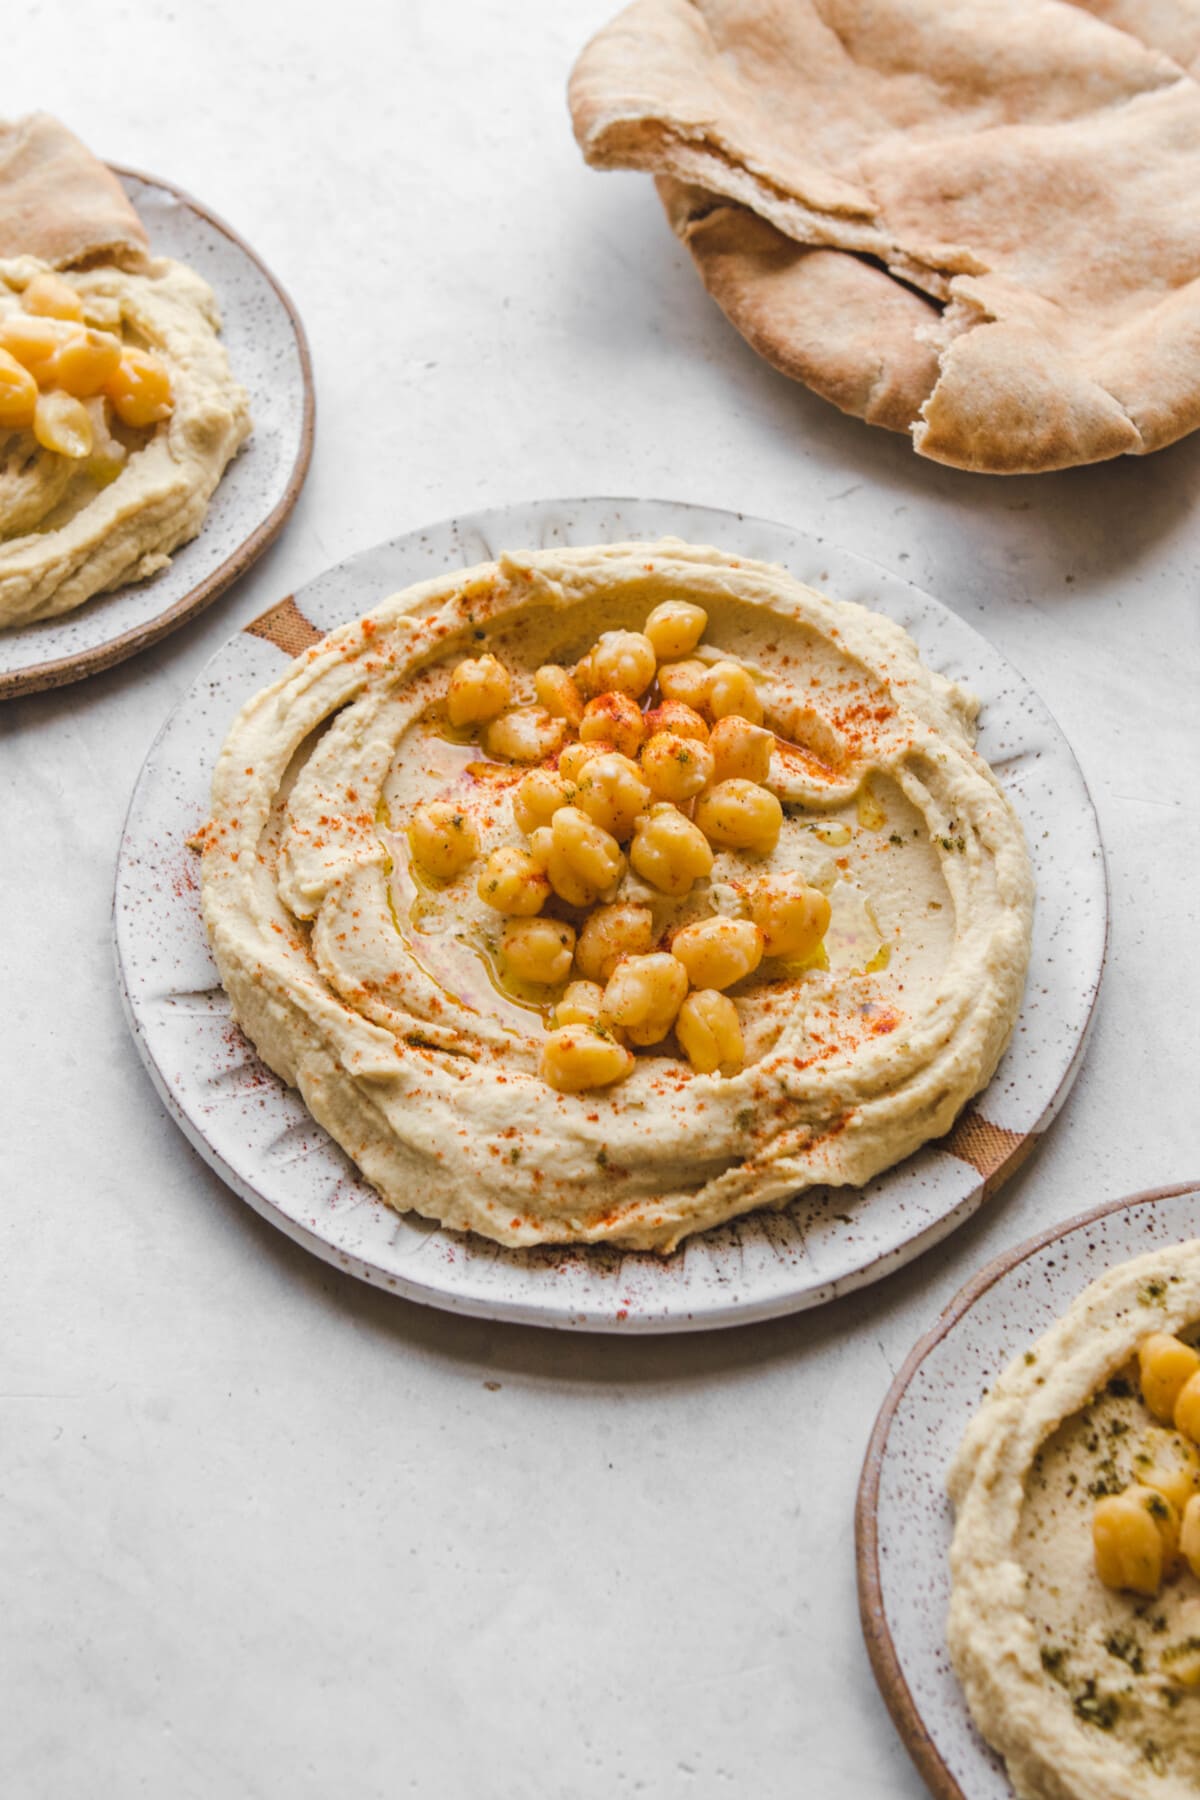 3 plates of hummus topped with olive oil and chickpeas with pita bread off to the side